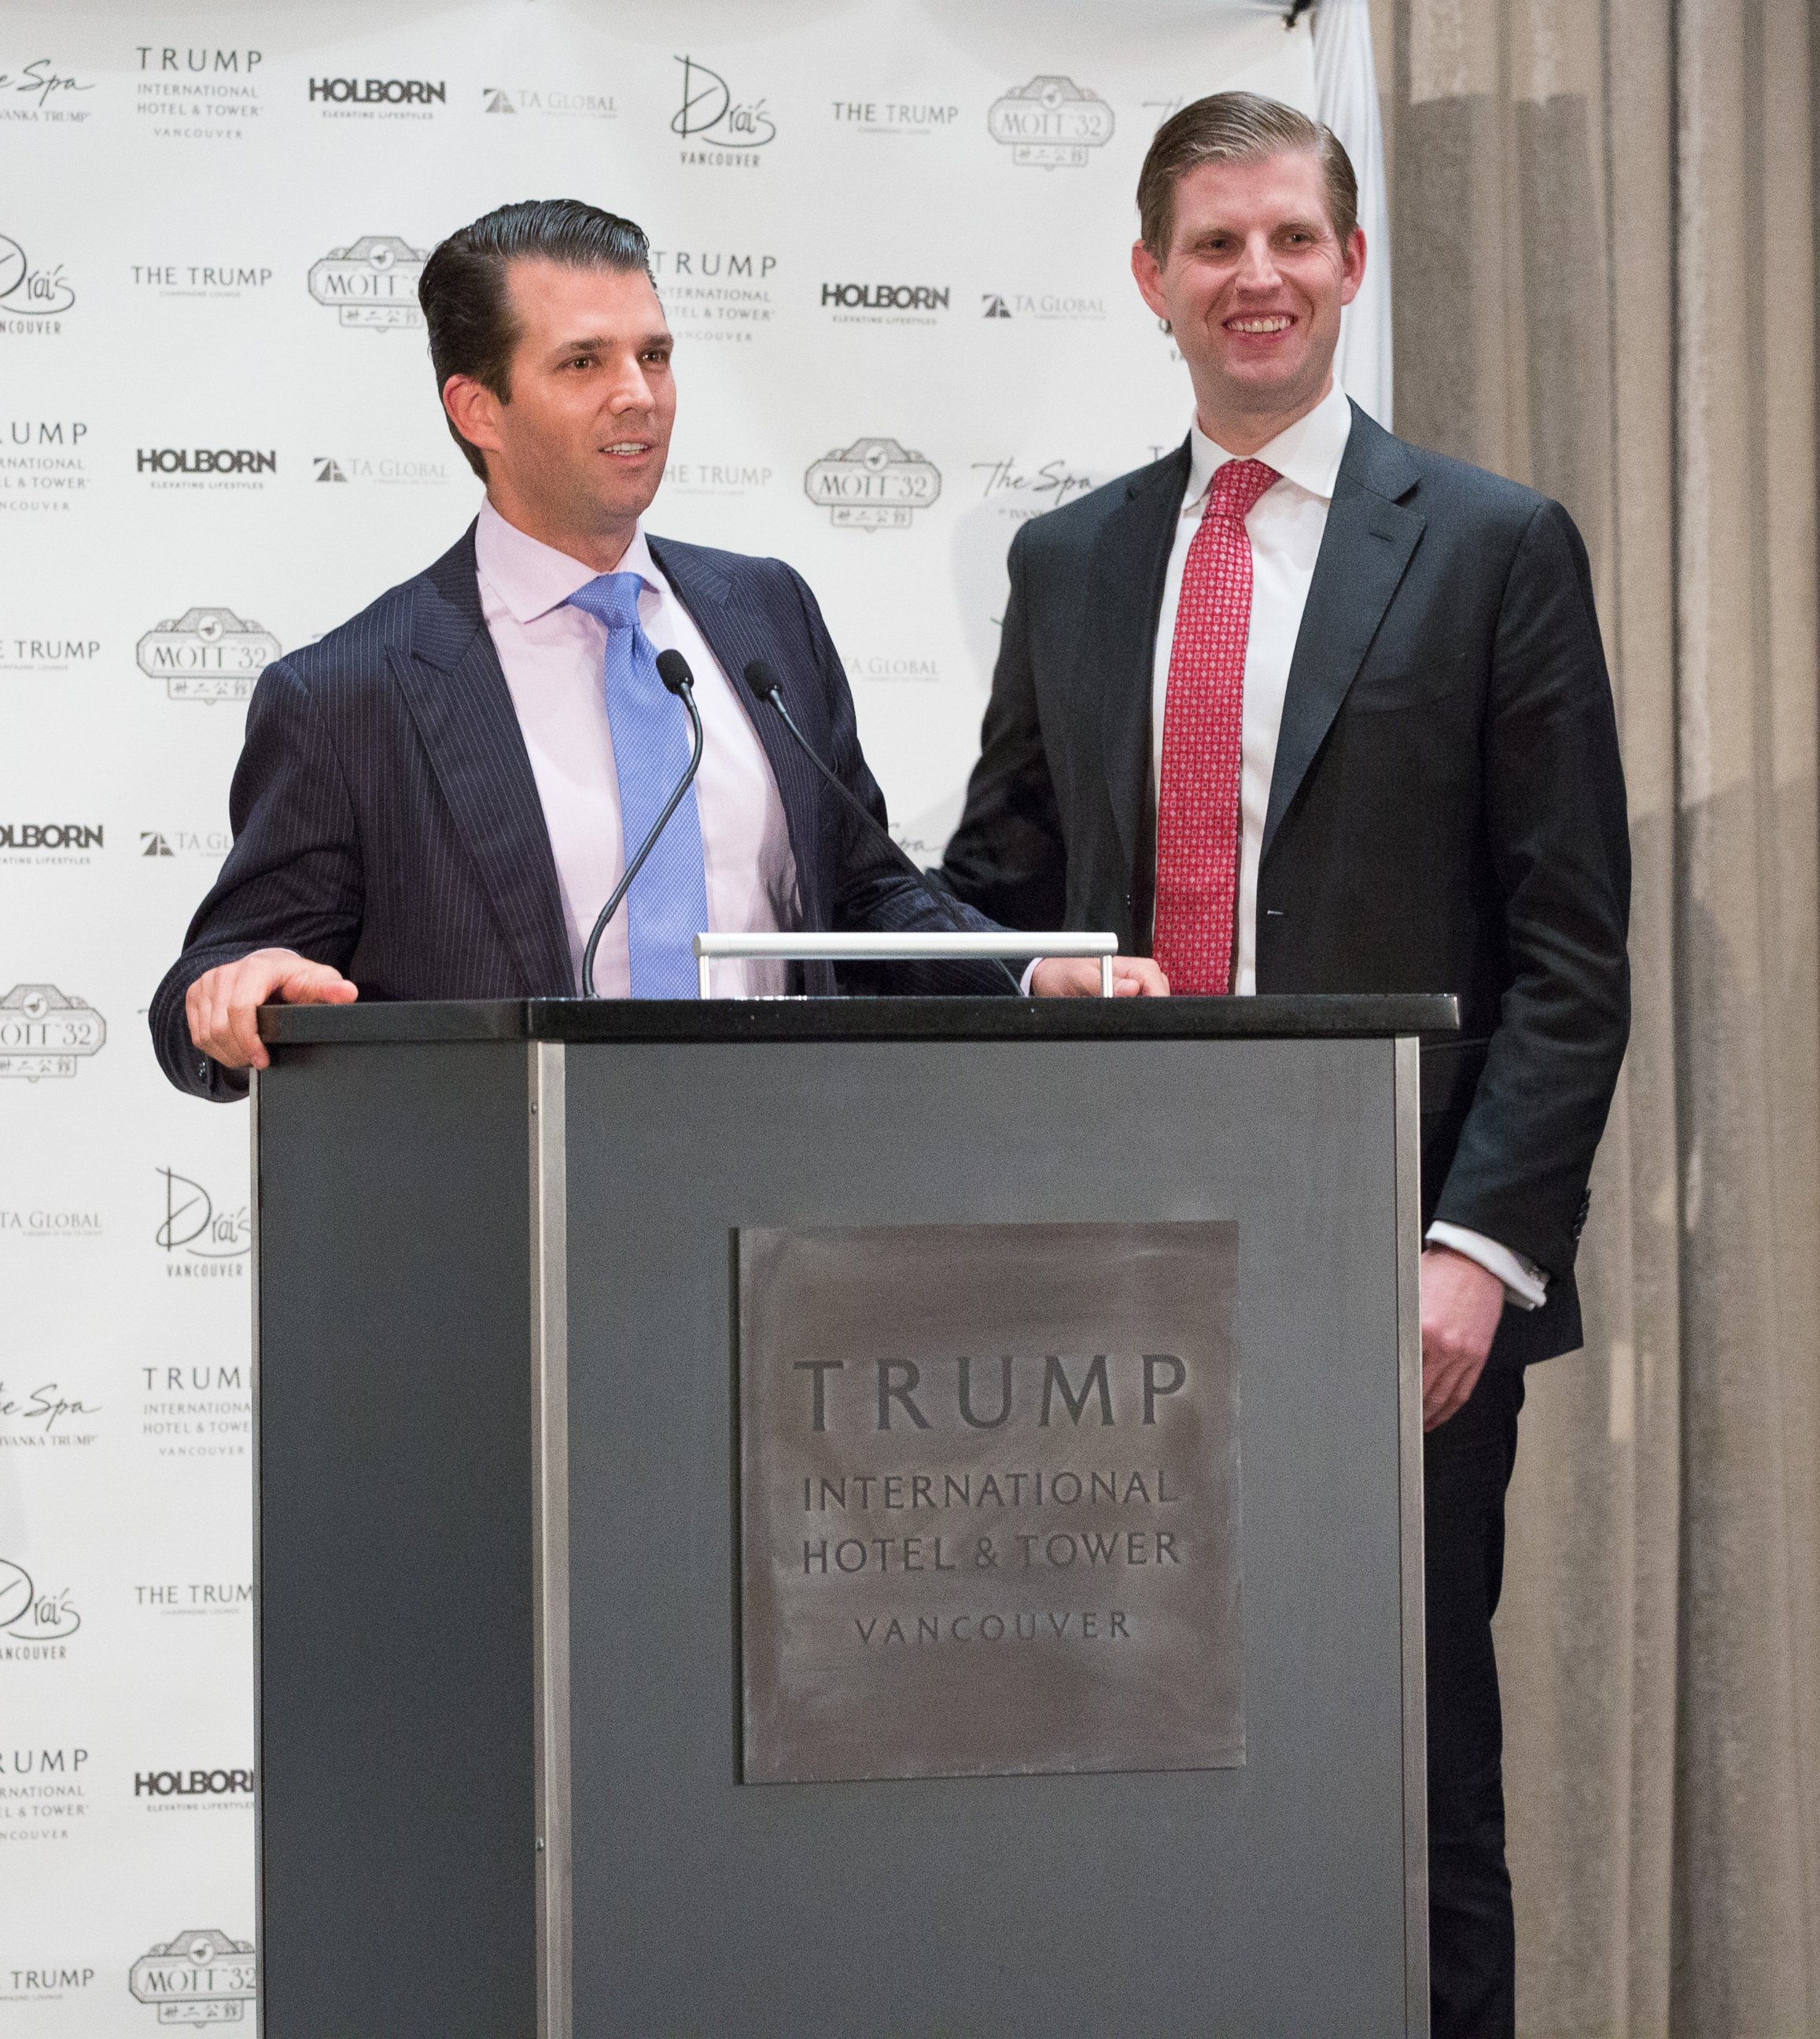 PHOTO: (L-R) Donald Trump Jr. and Eric Trump, Executive Vice Presidents of Development and Acquisition and Development for the Trump Organization, attend the Trump International Hotel And Tower Vancouver Grand Opening, Feb. 28, 2017 in Vancouver.